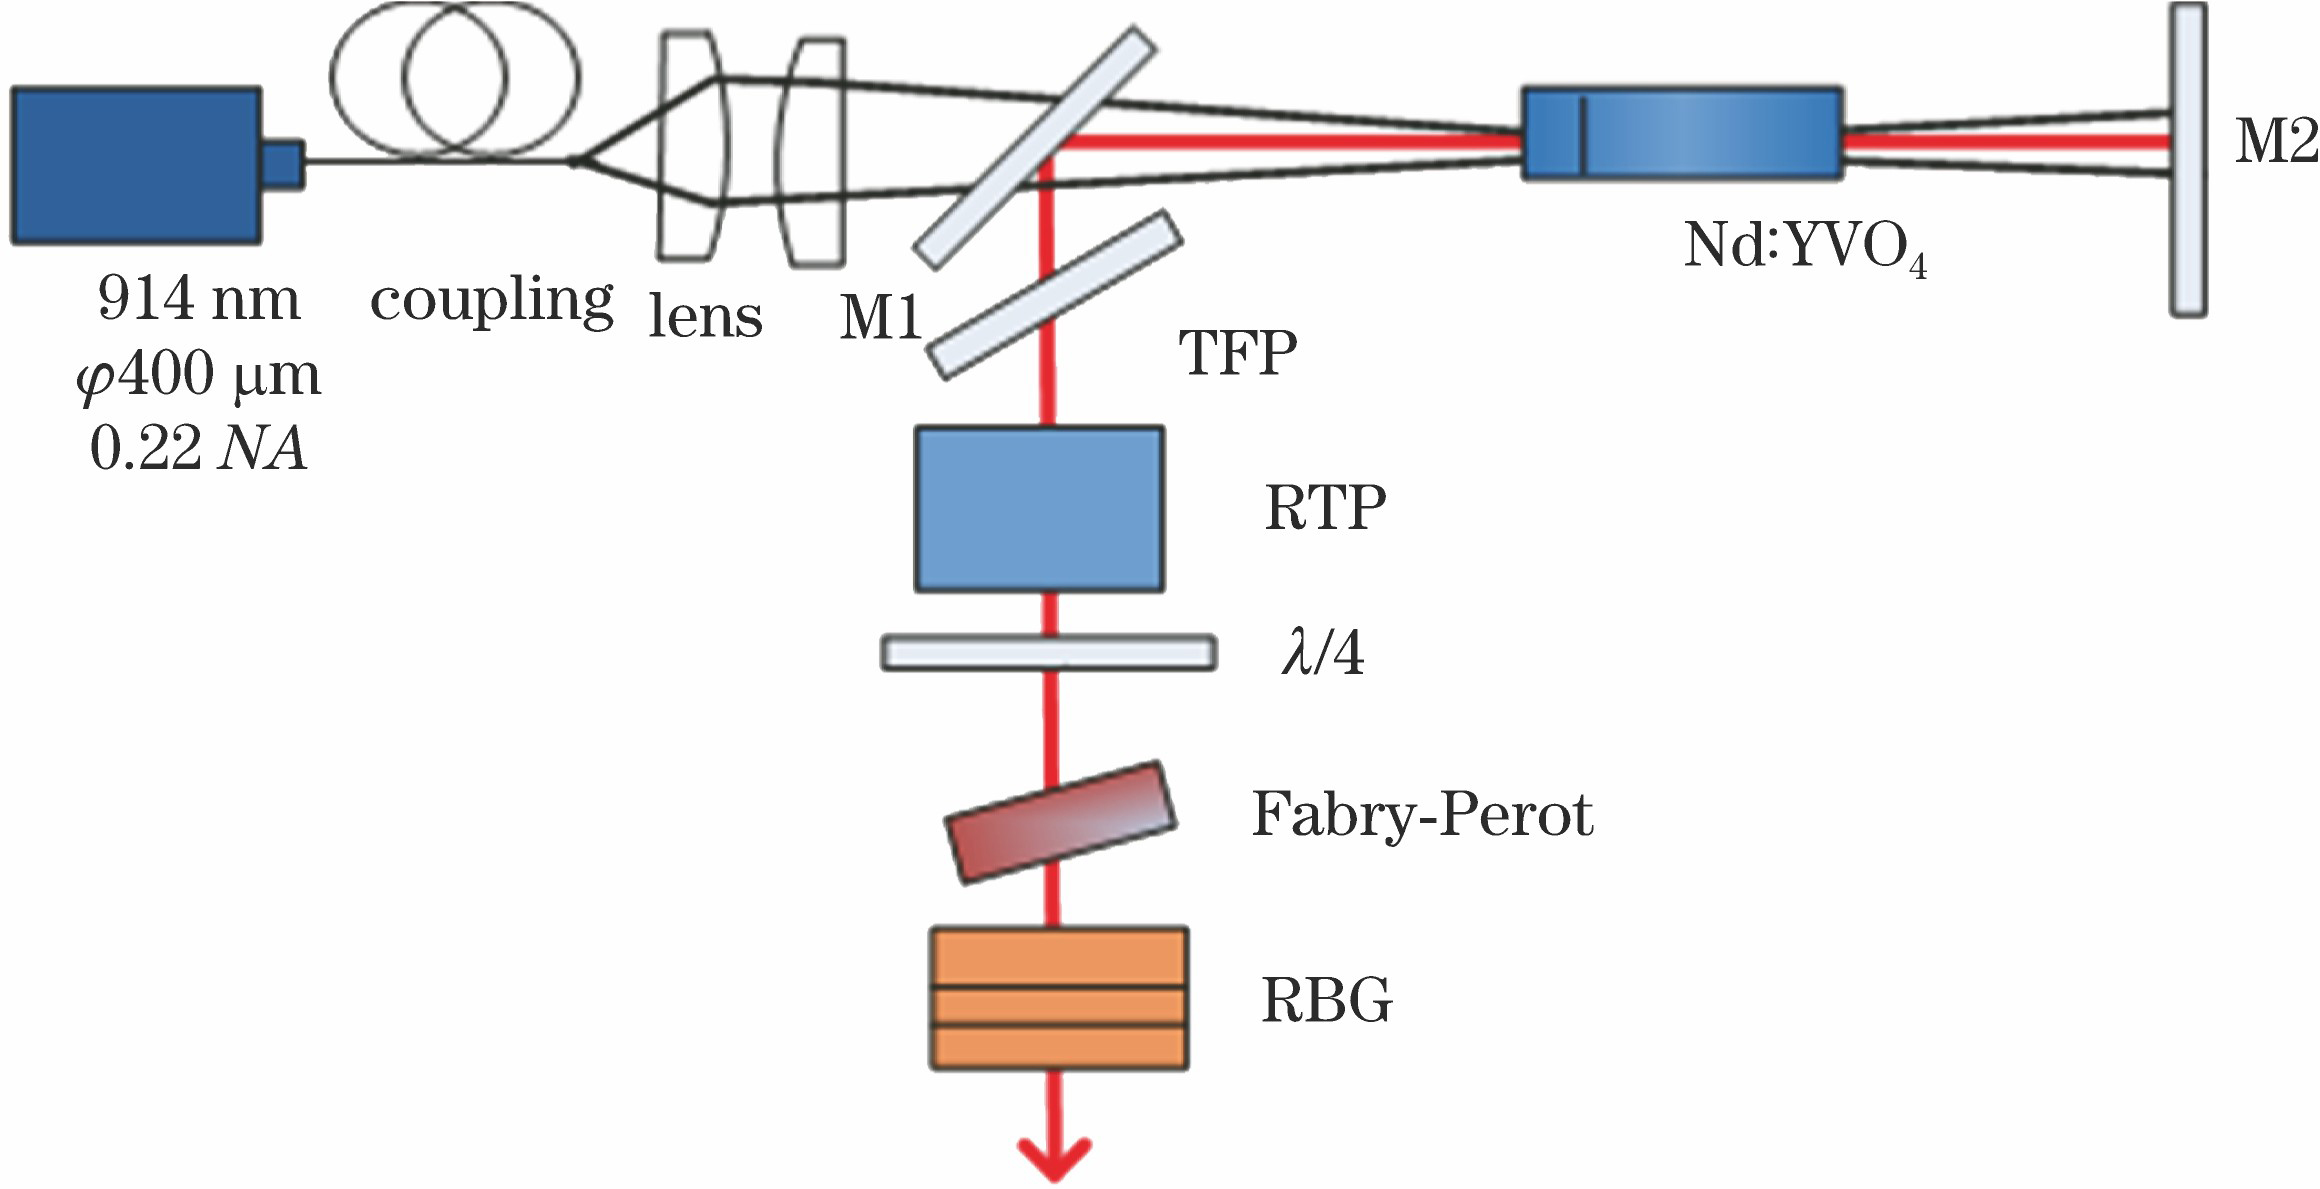 Schematic of experimental setup of active Q-switching based on RBG combined with etalon